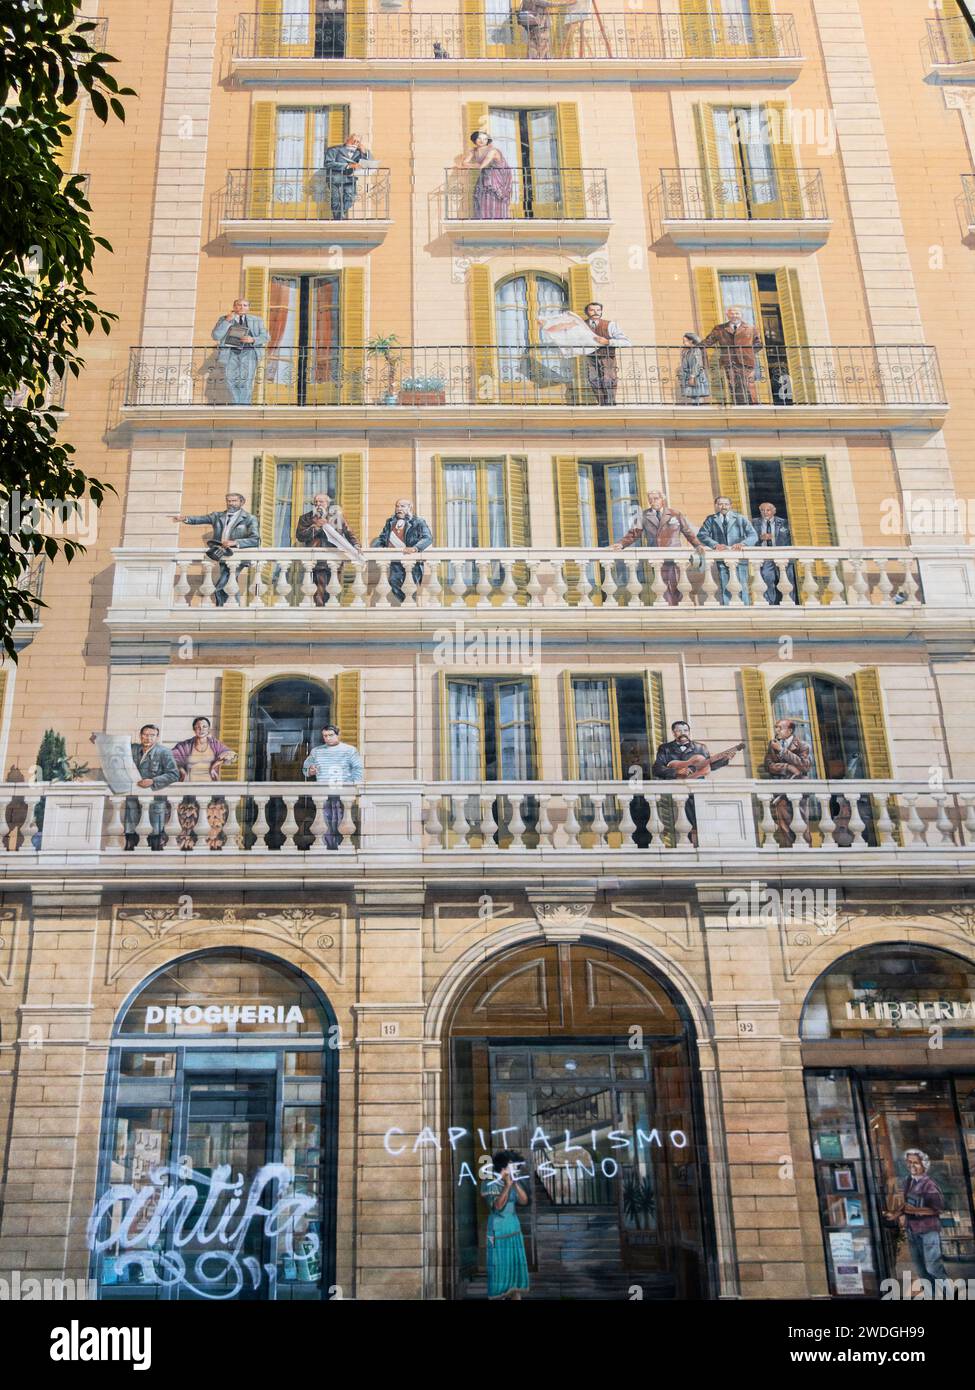 Commemorative mural of famous Spaniards on a building in Barcelona, Spain. Stock Photo